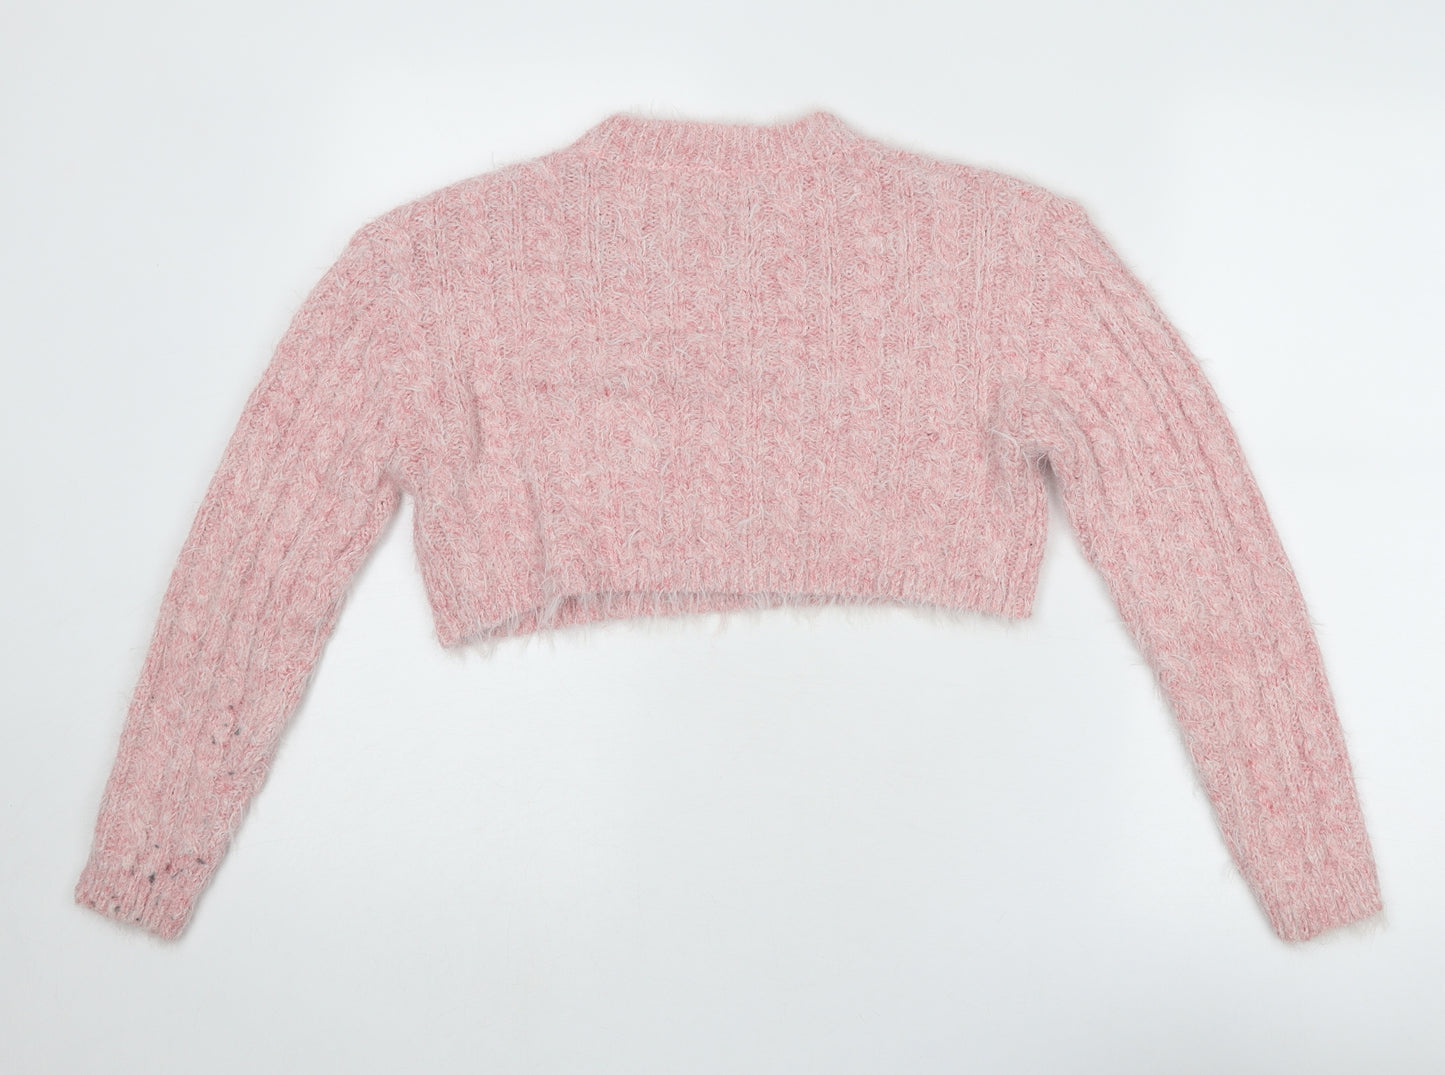 Topshop Womens Pink Round Neck Acrylic Pullover Jumper Size S